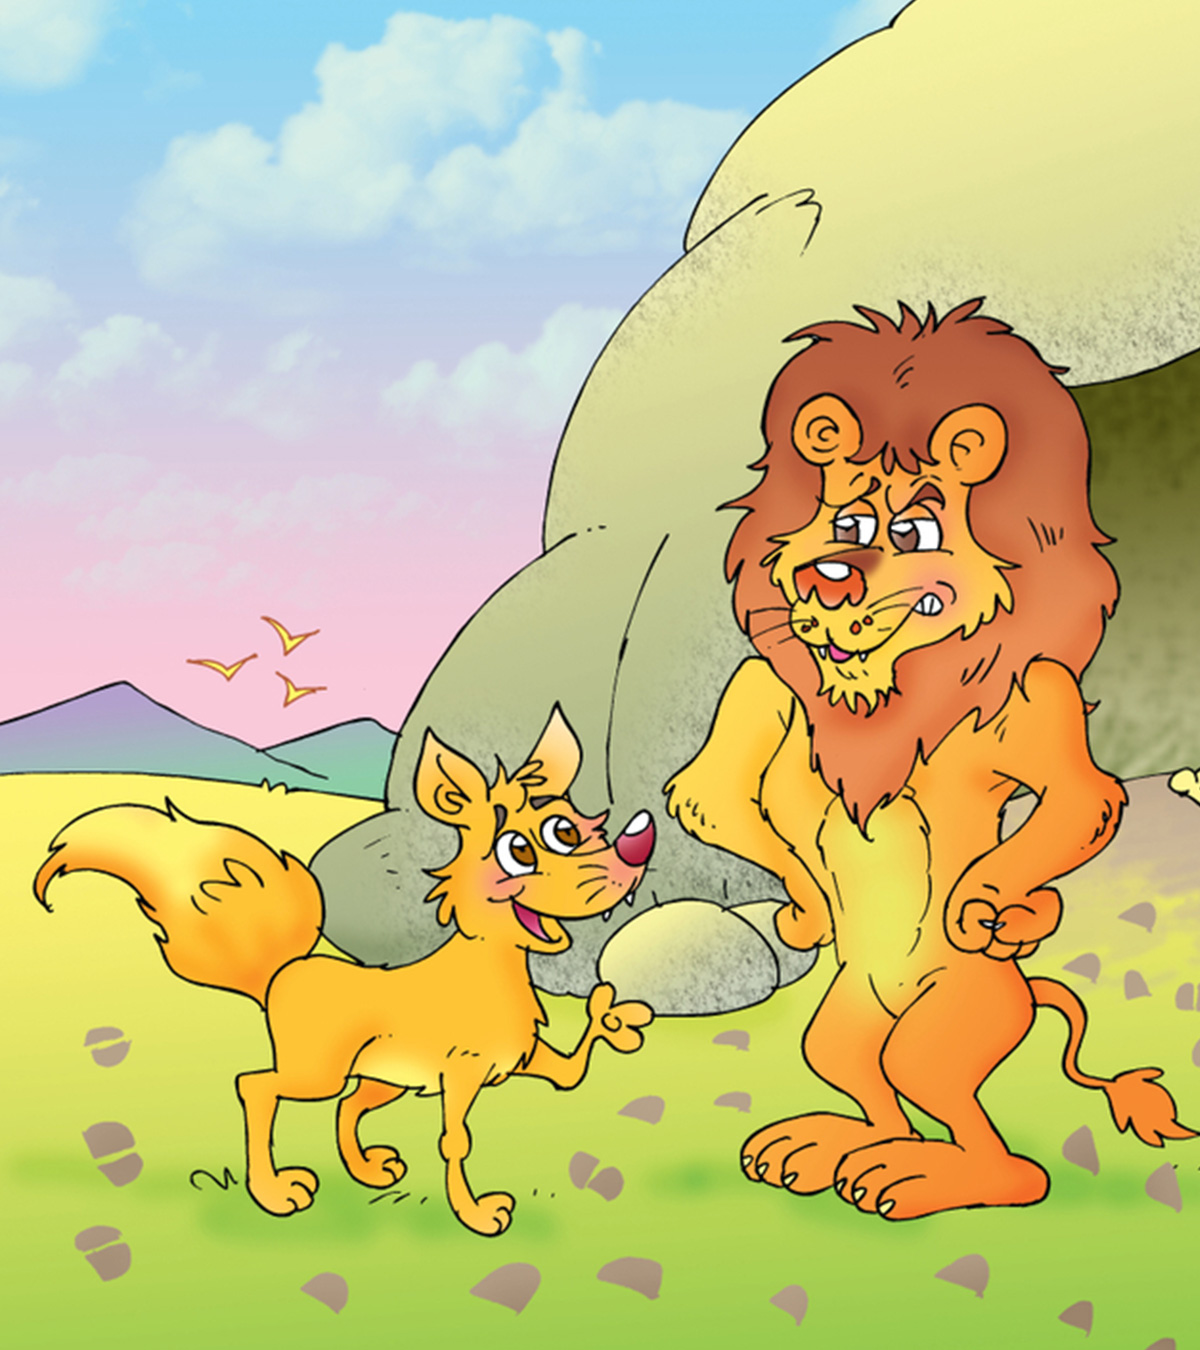 Fox and Lion story for kids